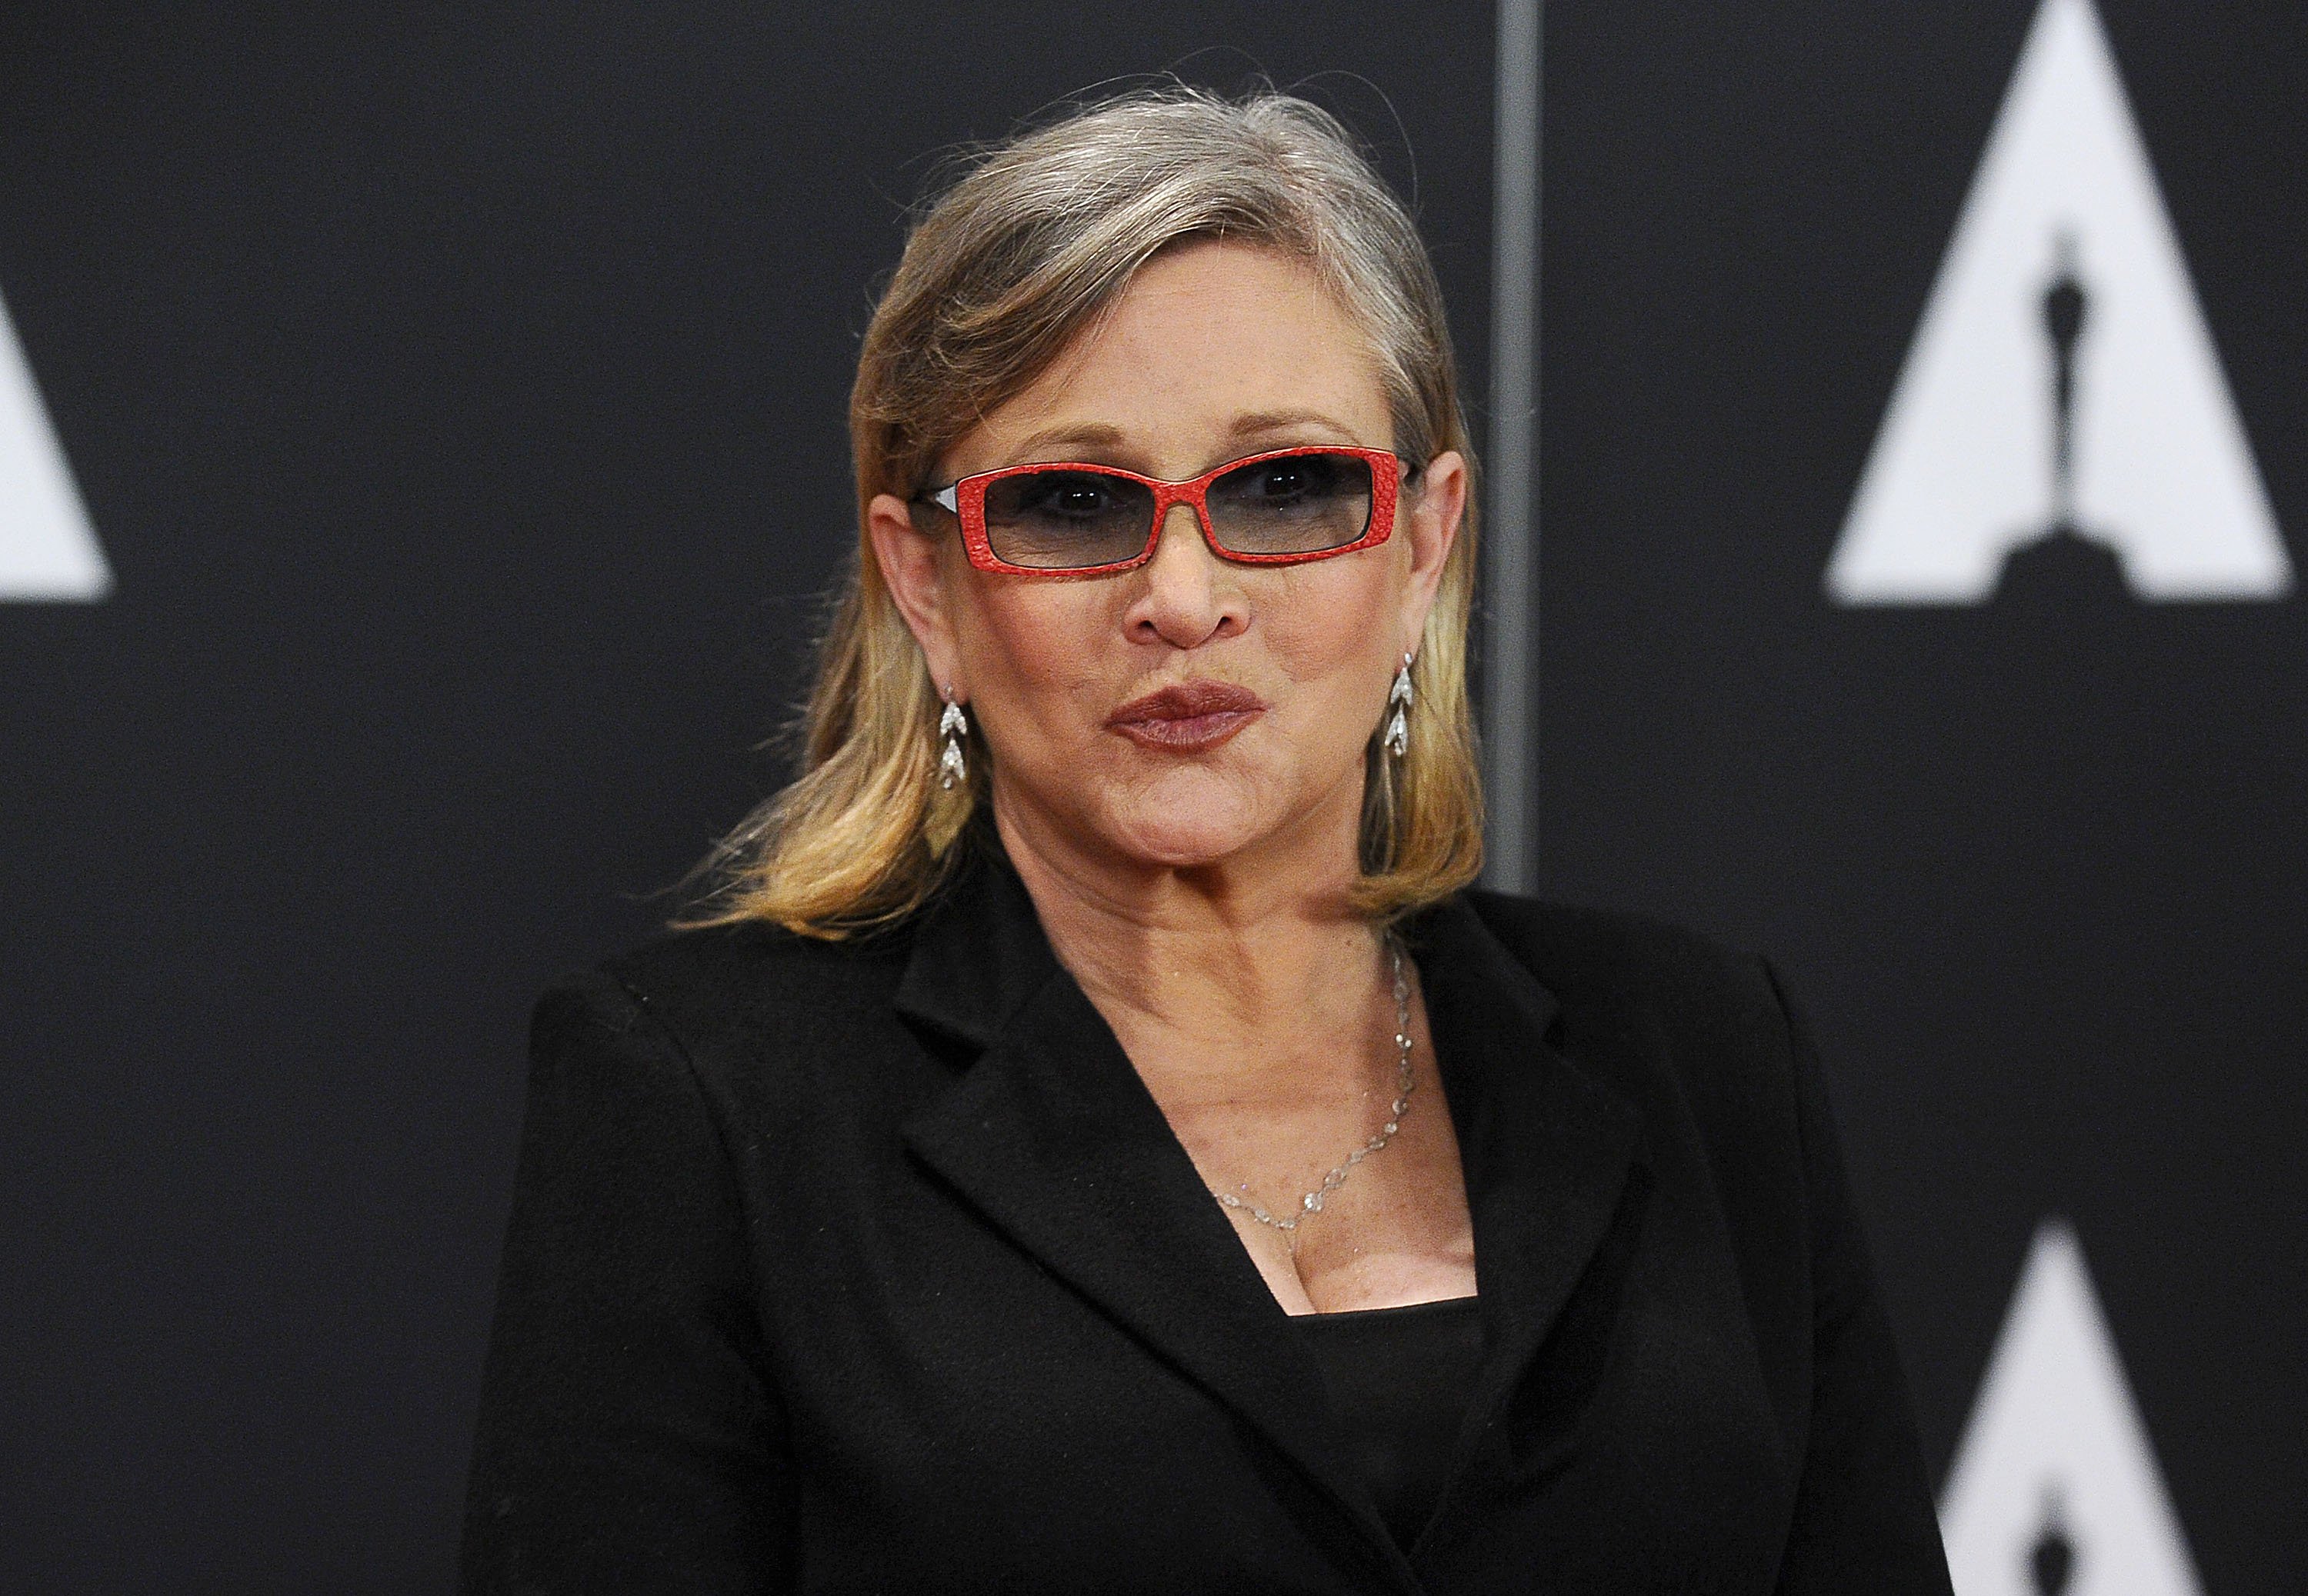 Carrie Fisher at the 7th annual Governors Awards on November 14, 2015 in Hollywood, California. | Photo: Getty Images